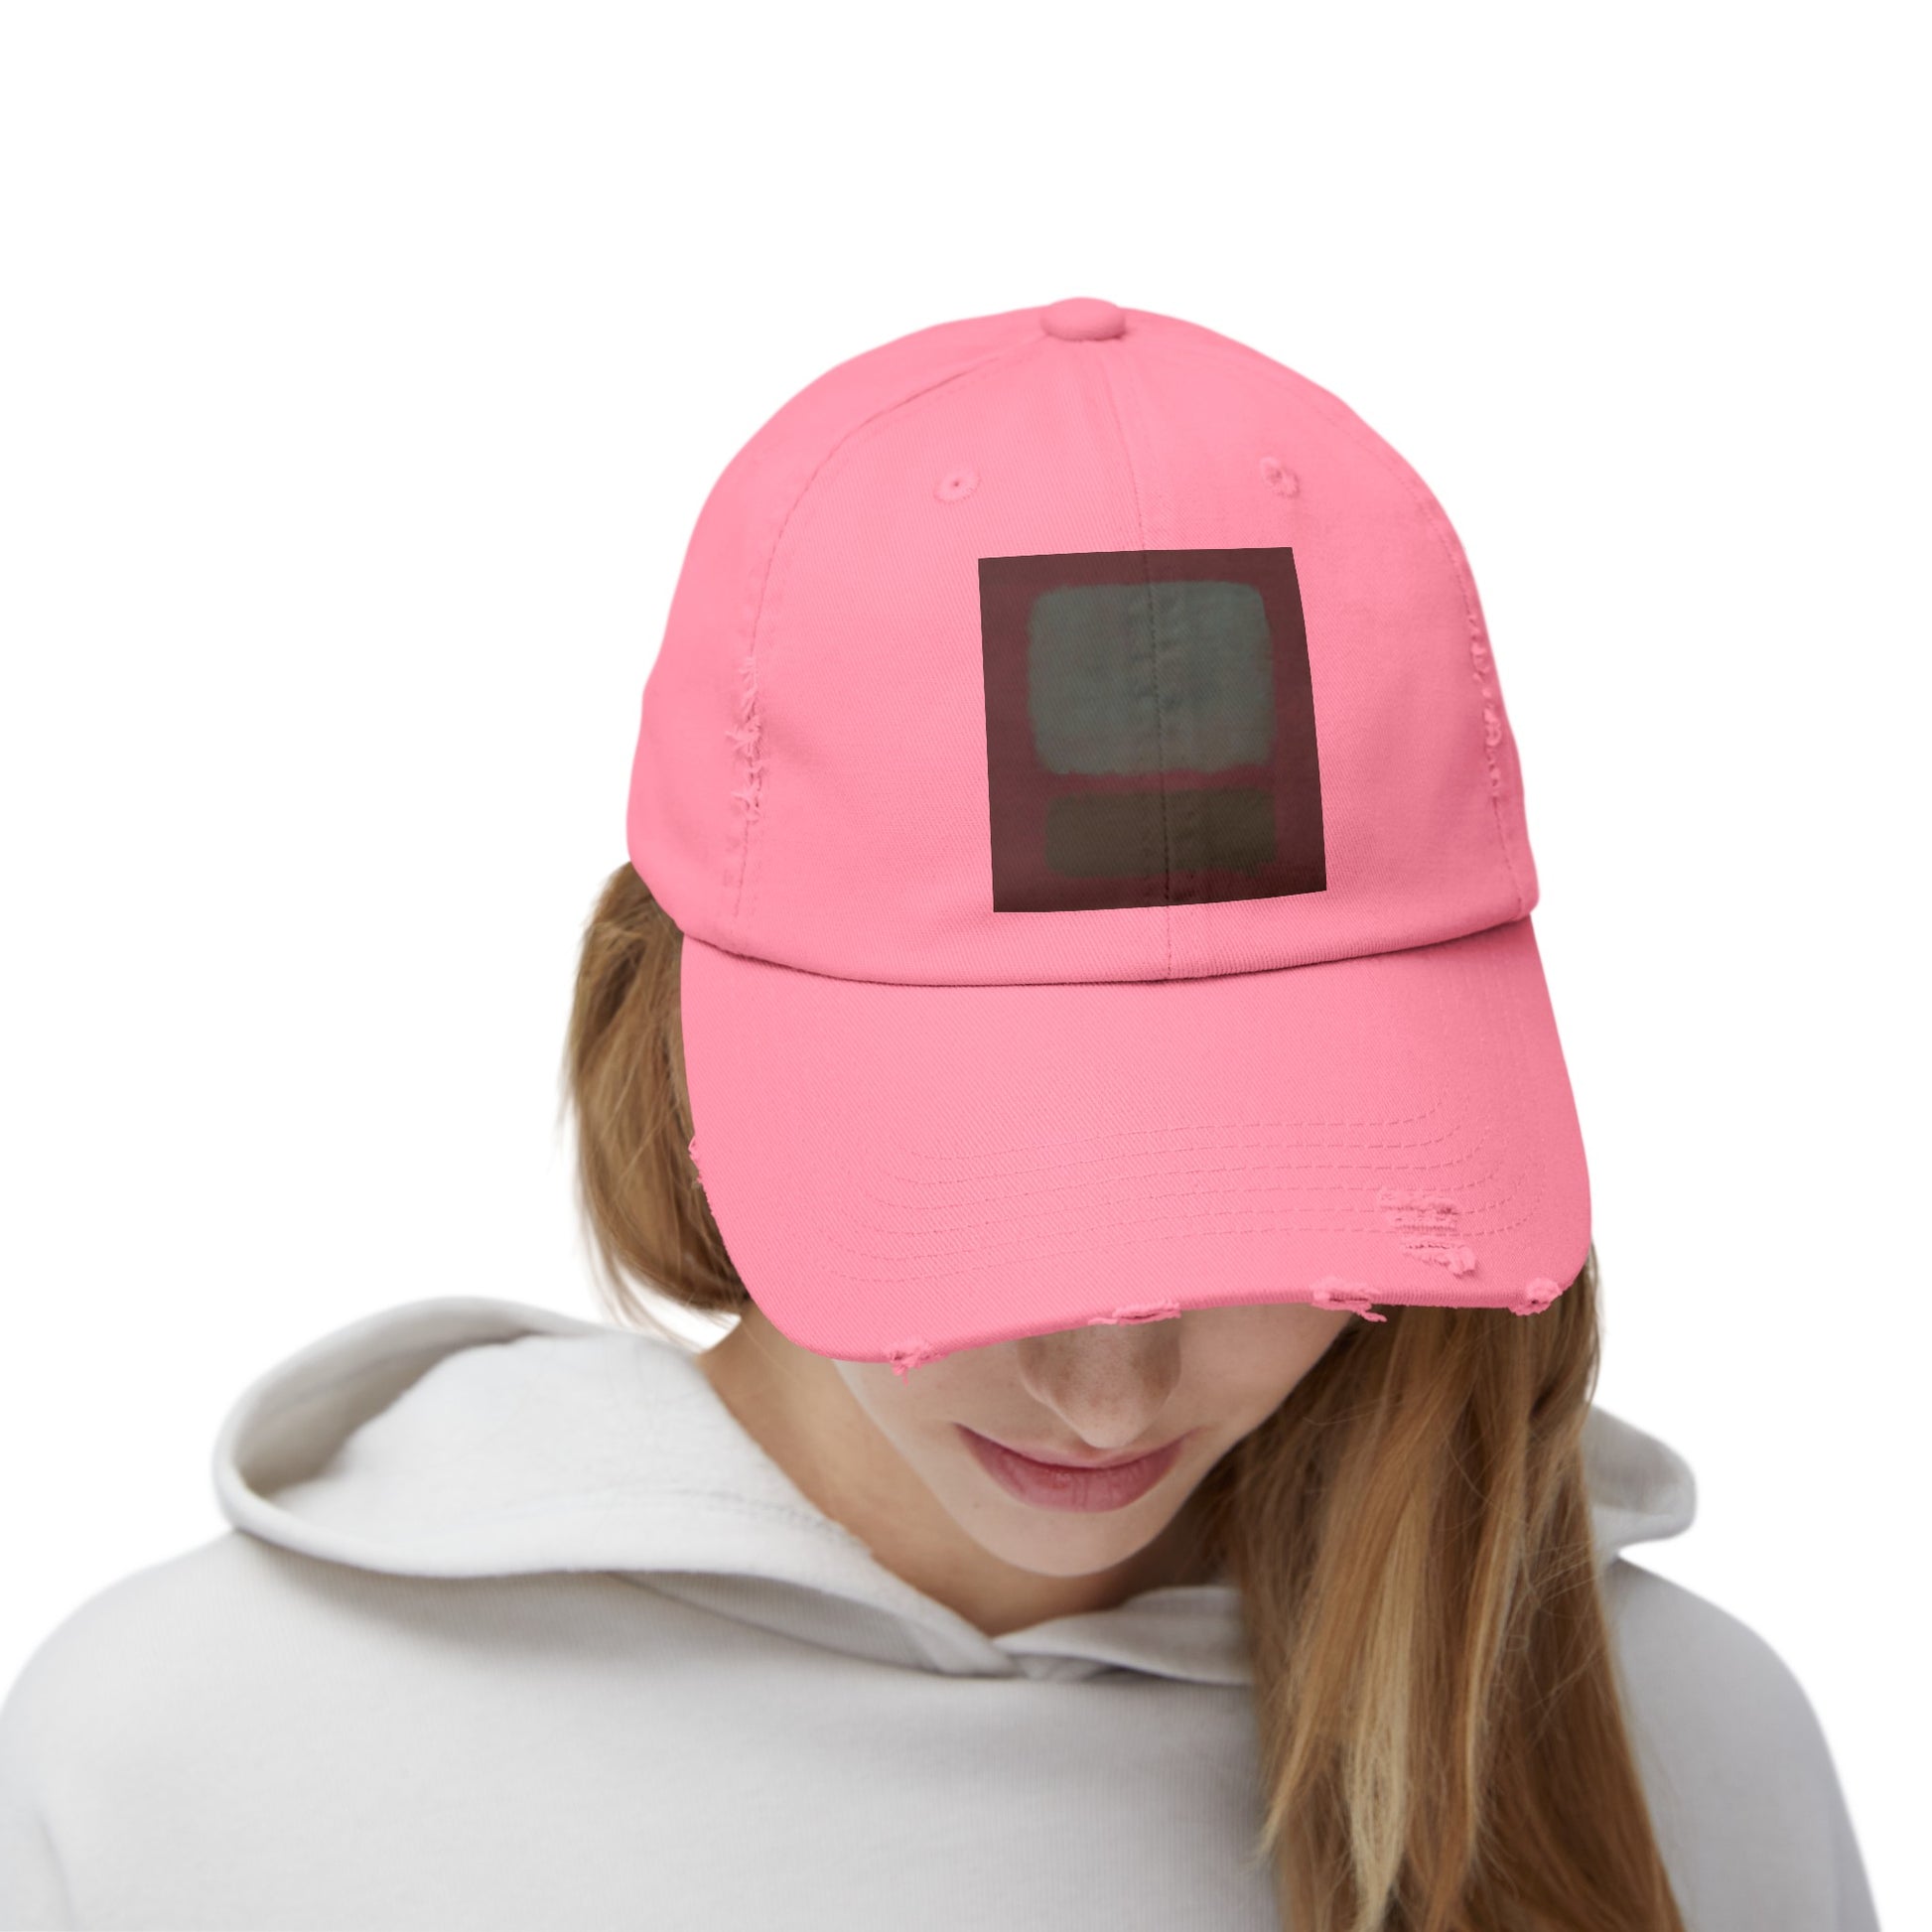 a woman wearing a pink hat with a black square on it